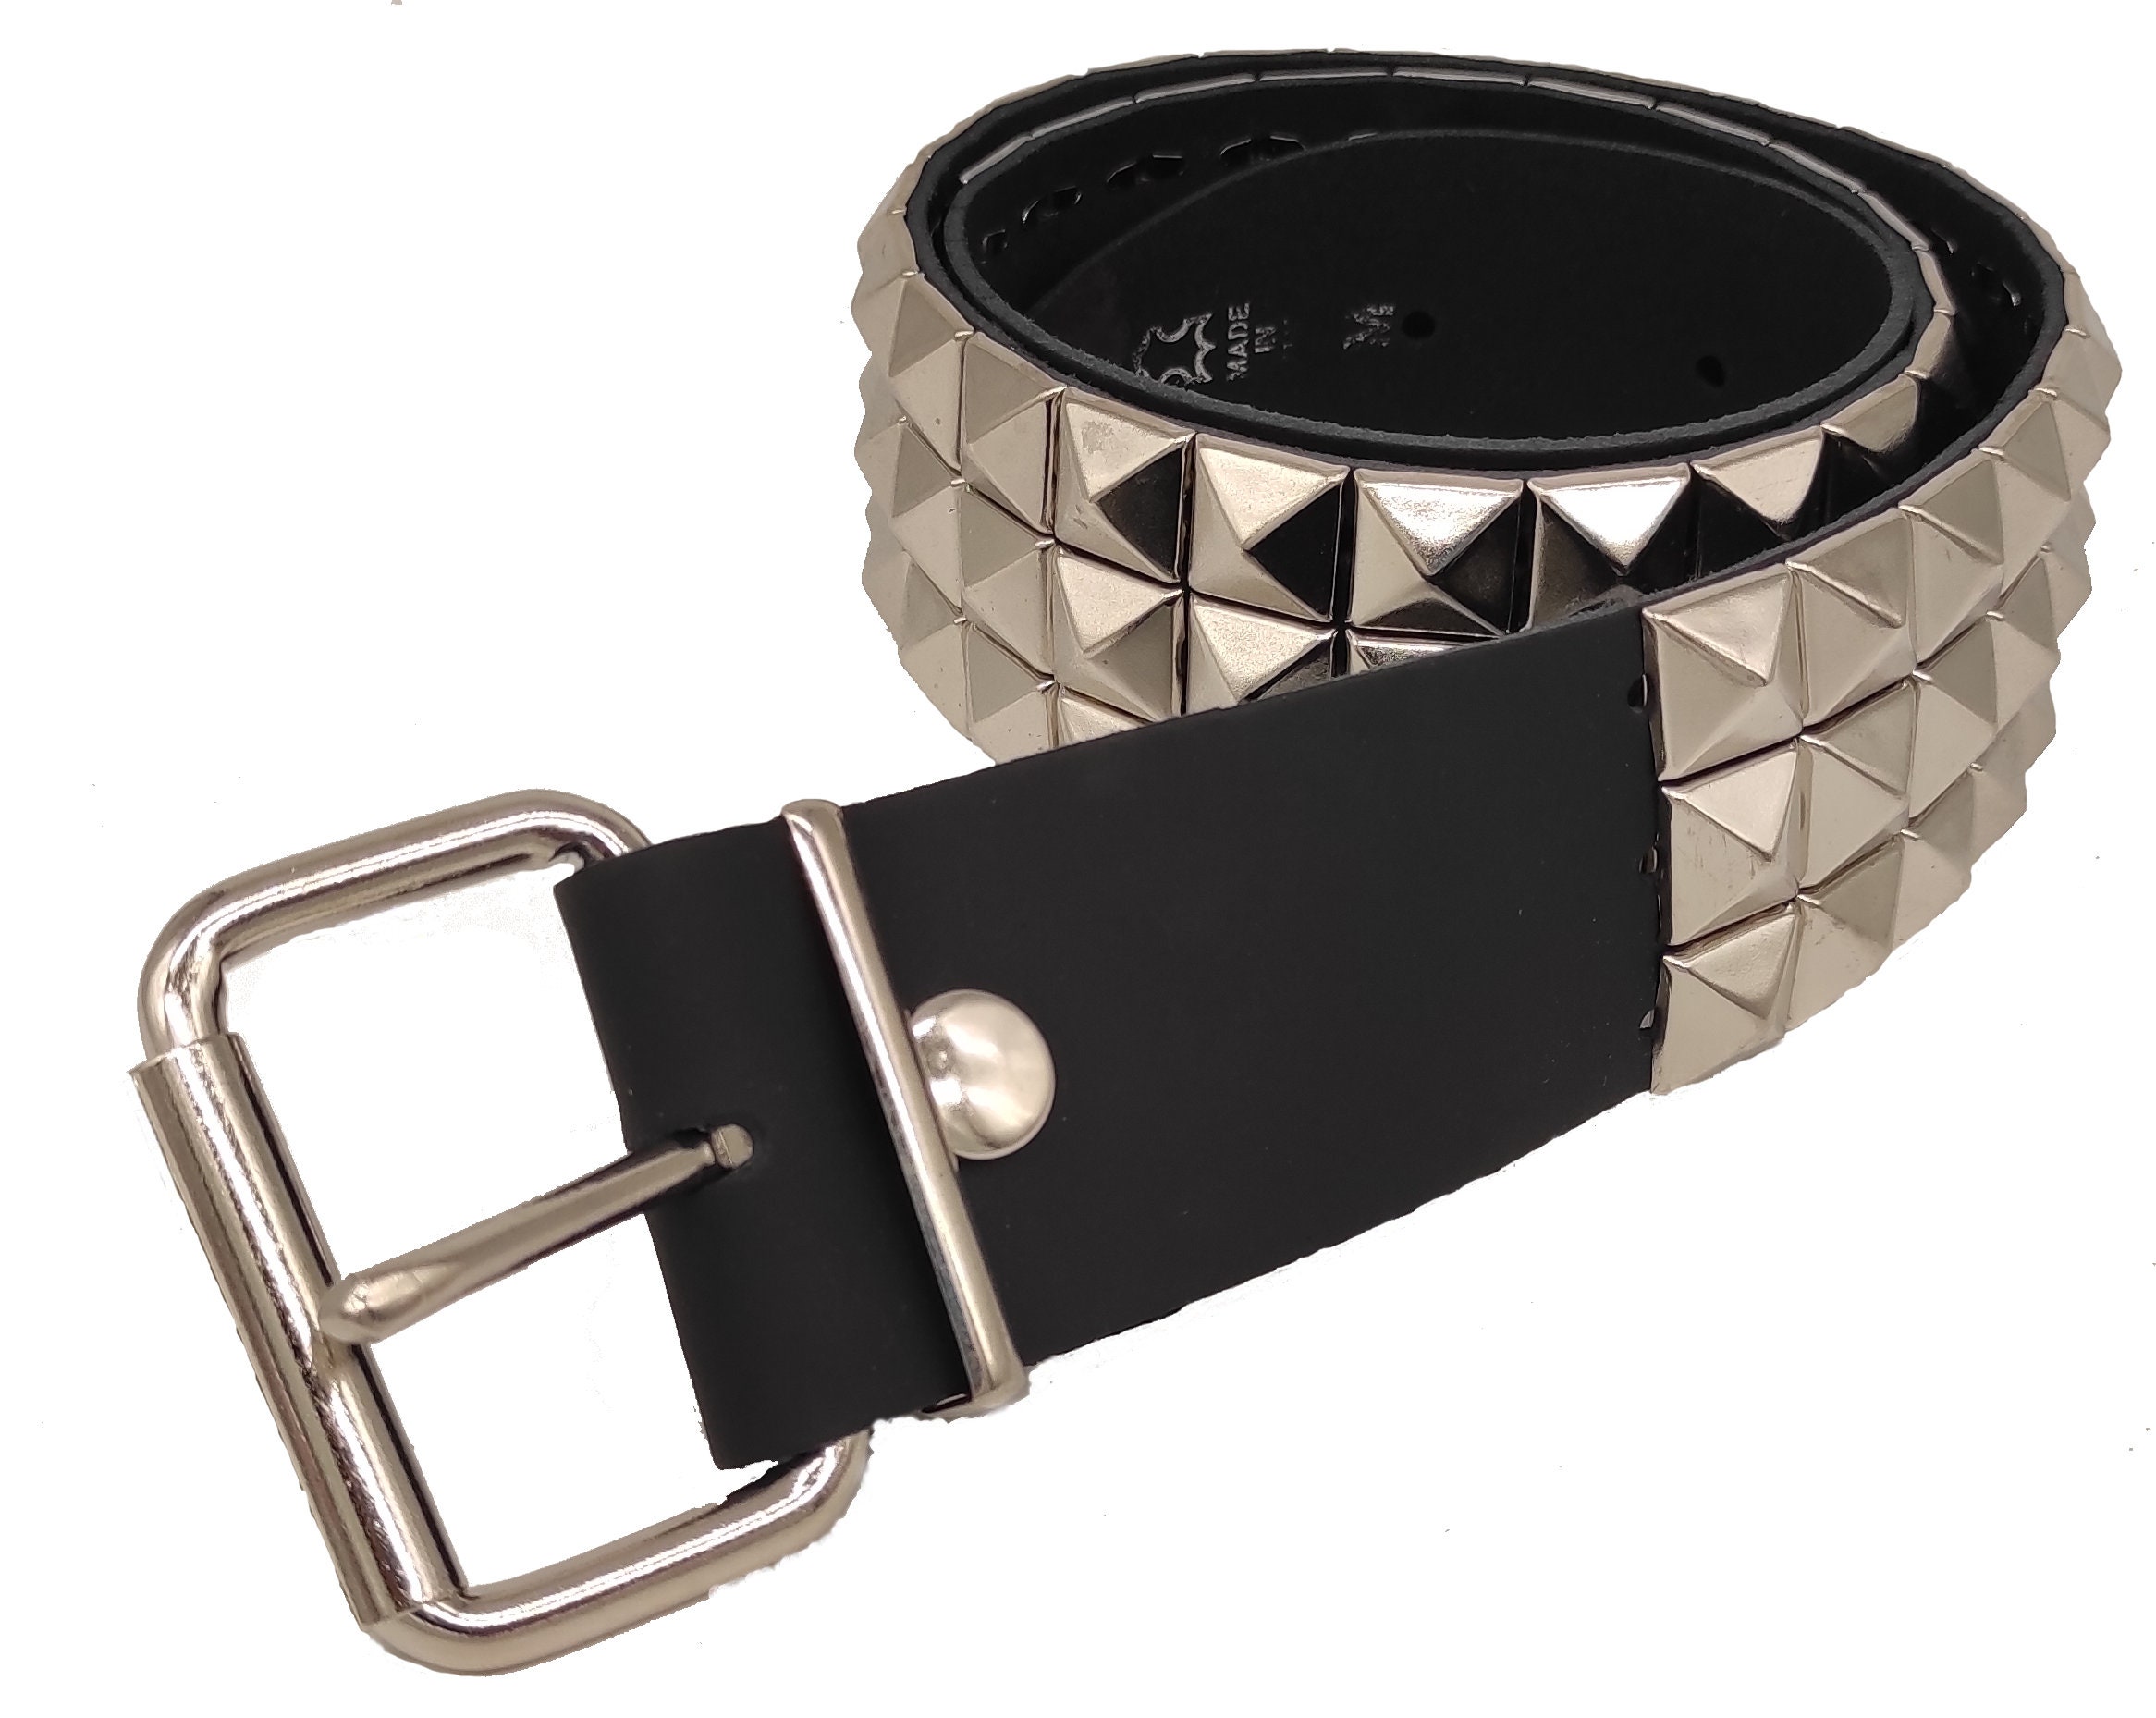 Stud Belt in Real Leather with 3 Rows of Pyramid Studs